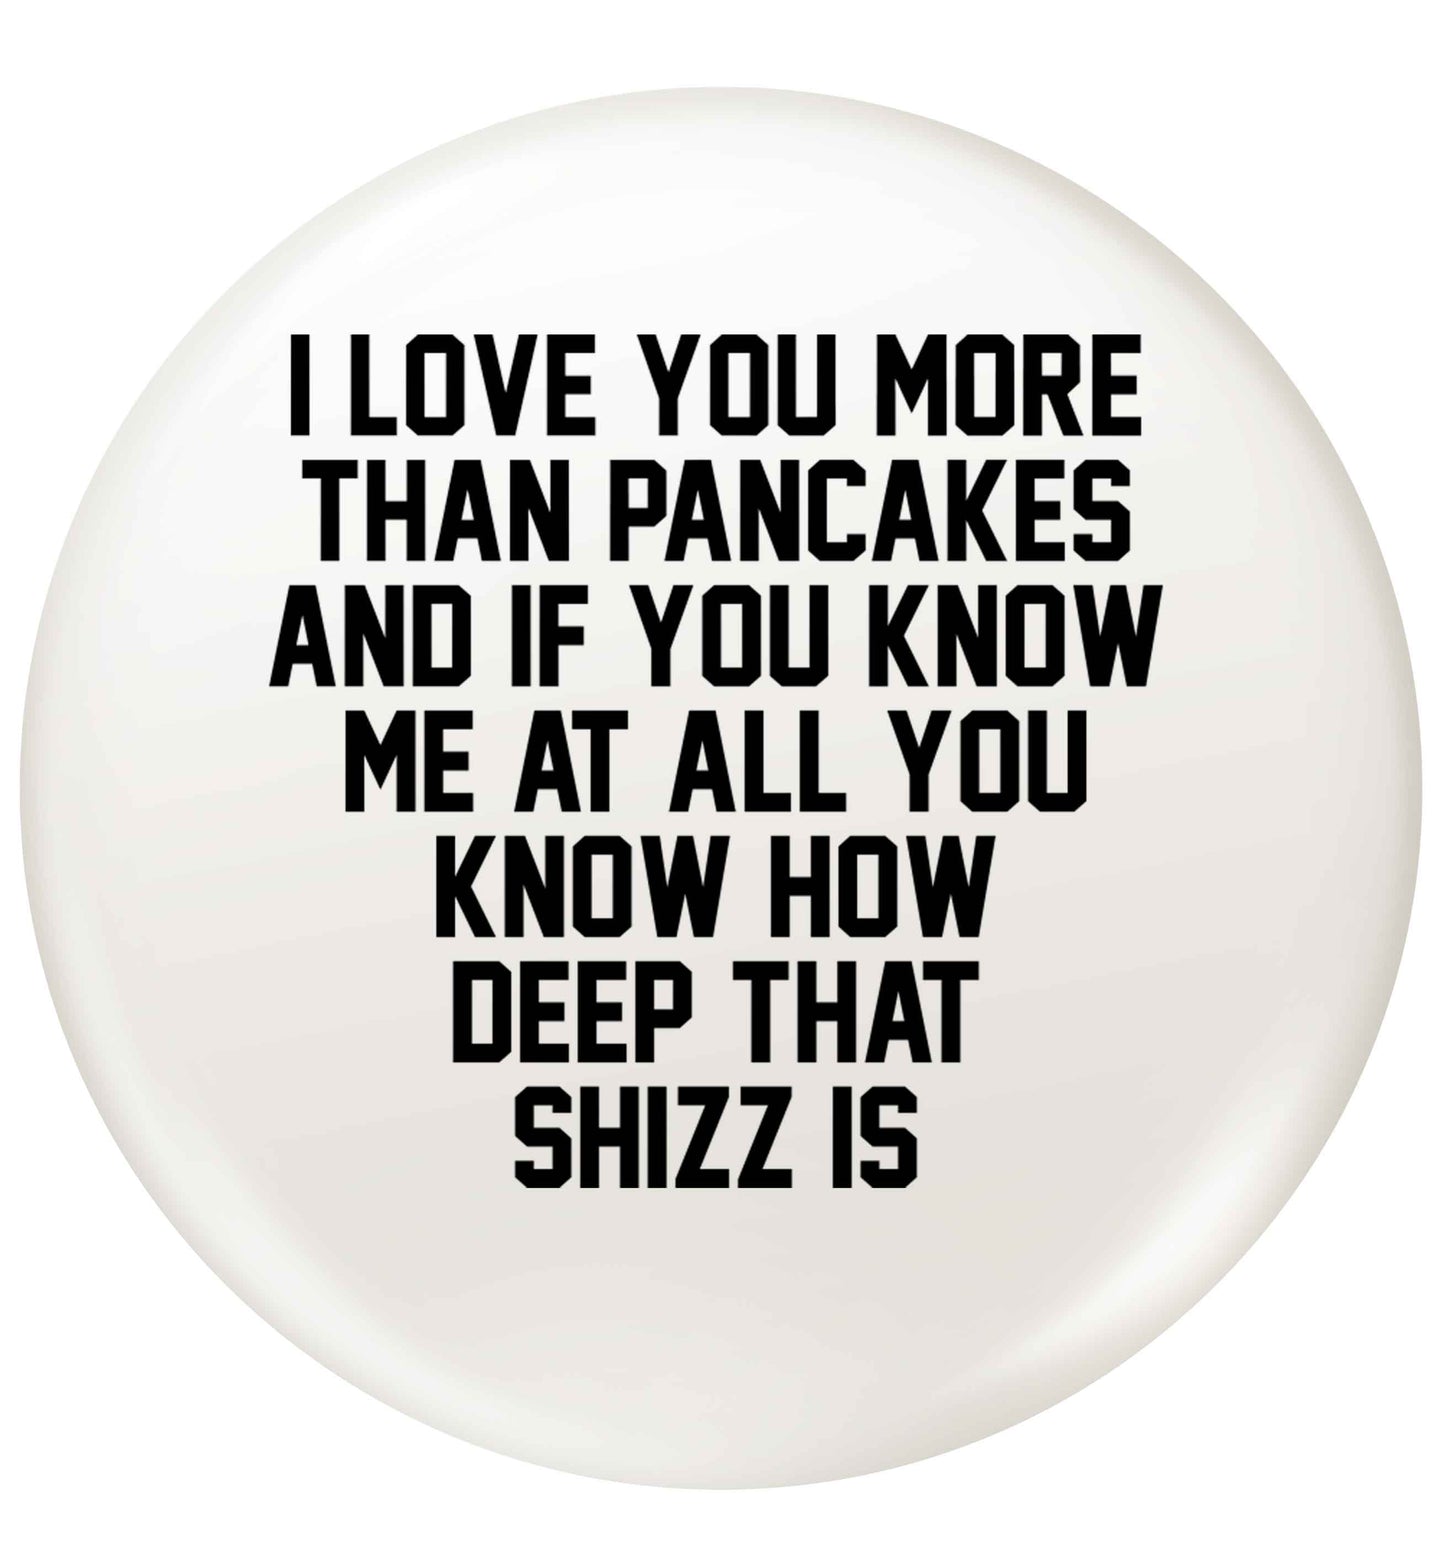 I love you more than pancakes and if you know me at all you know how deep that shizz is small 25mm Pin badge